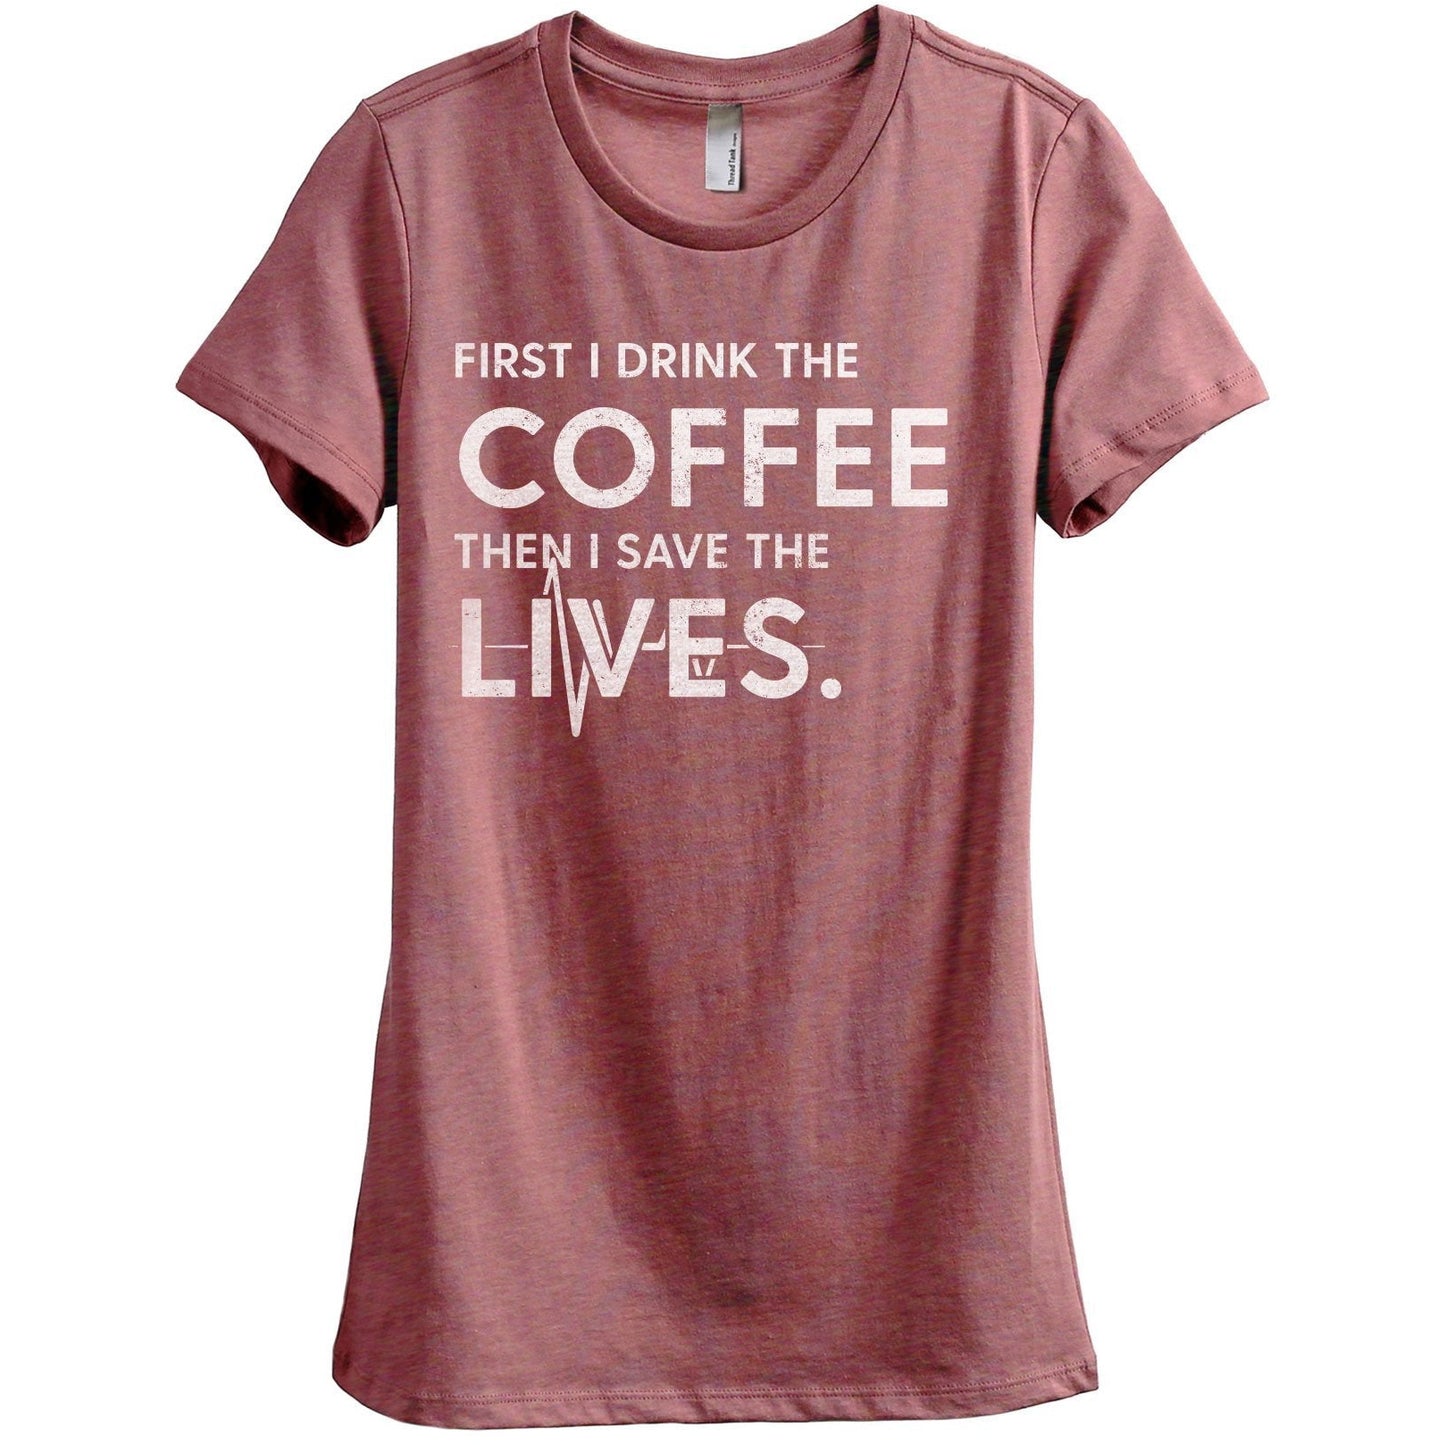 First I Drink The Coffee Then I Save The Lives Women's Relaxed Crewneck T-Shirt Top Tee Heather Rouge